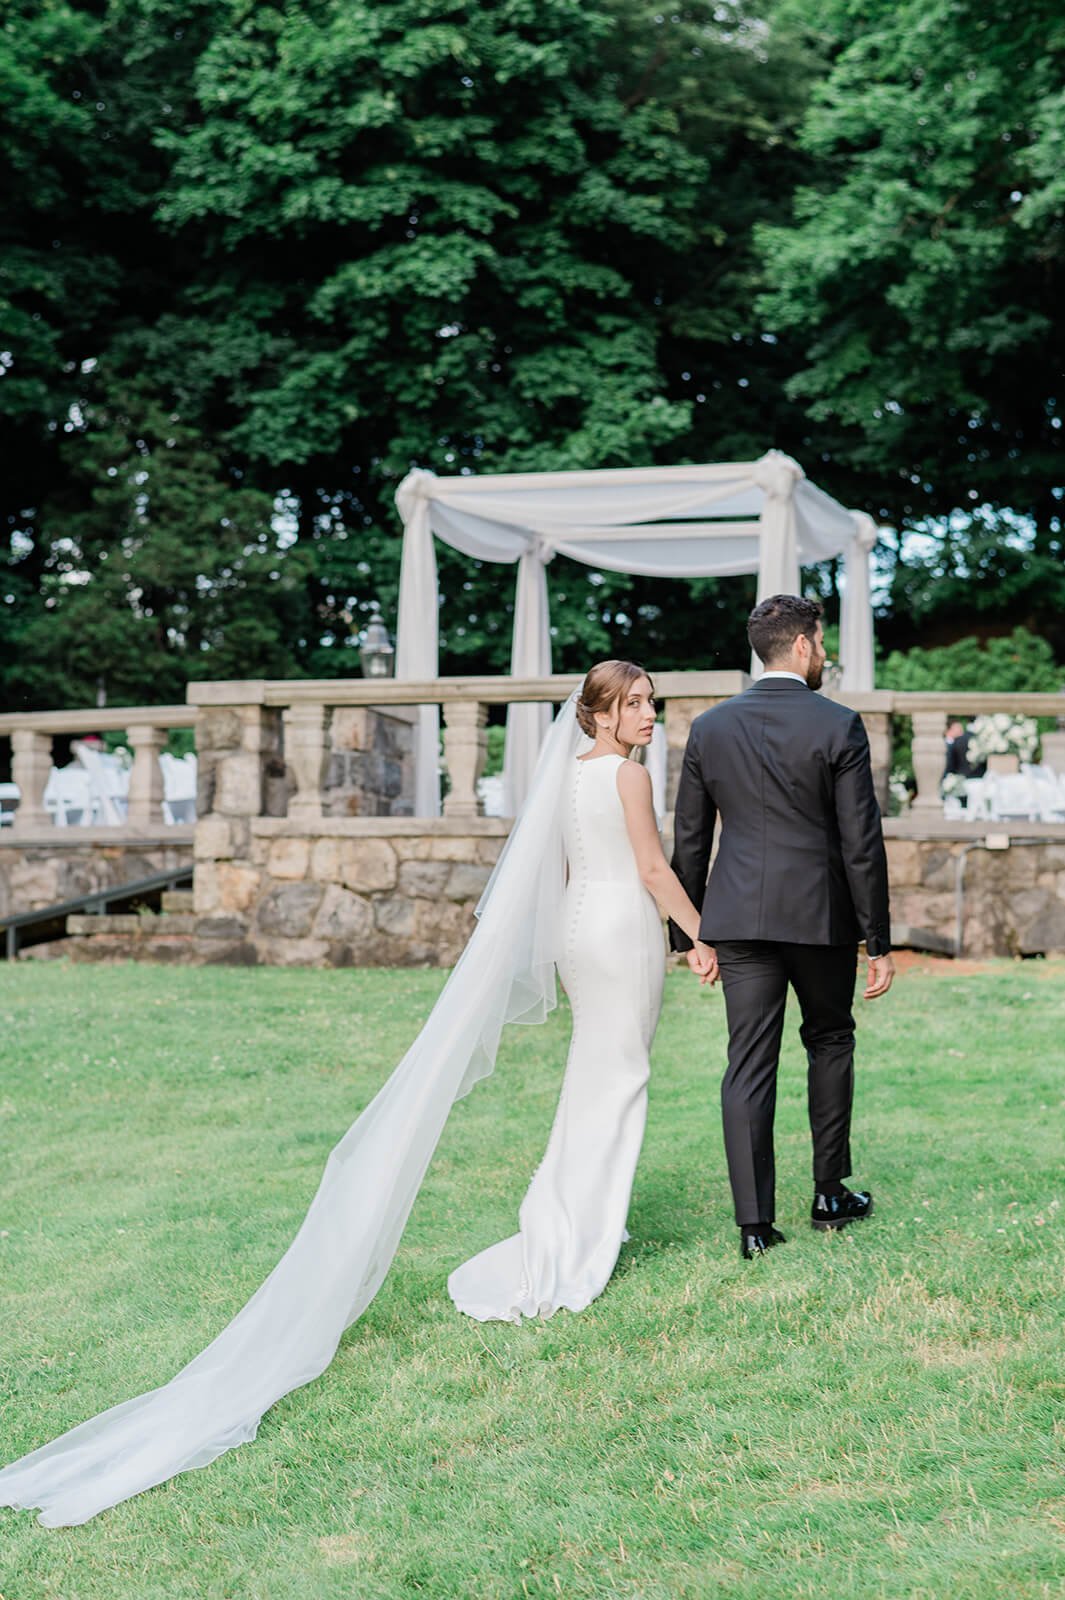 Bride and groom wedding day pictures at Tappan Hill Mansion